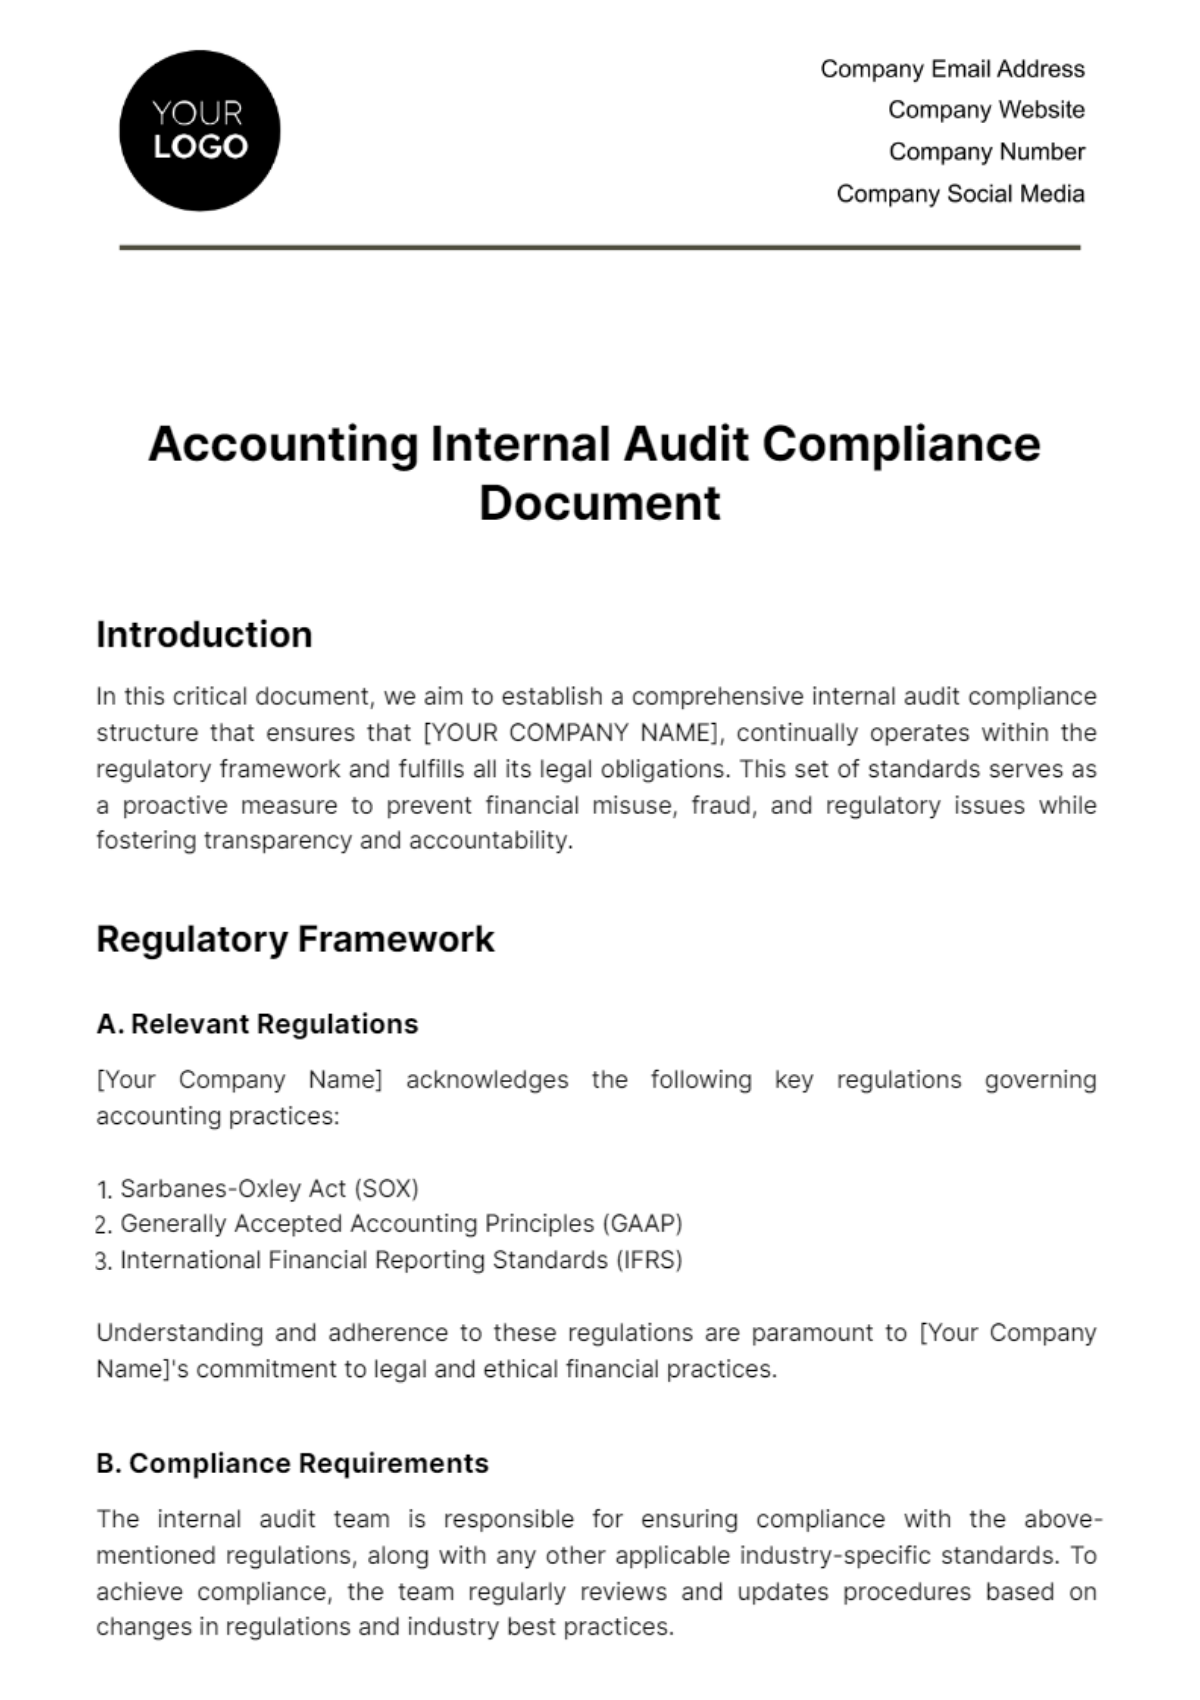 Accounting Internal Audit Compliance Document Template